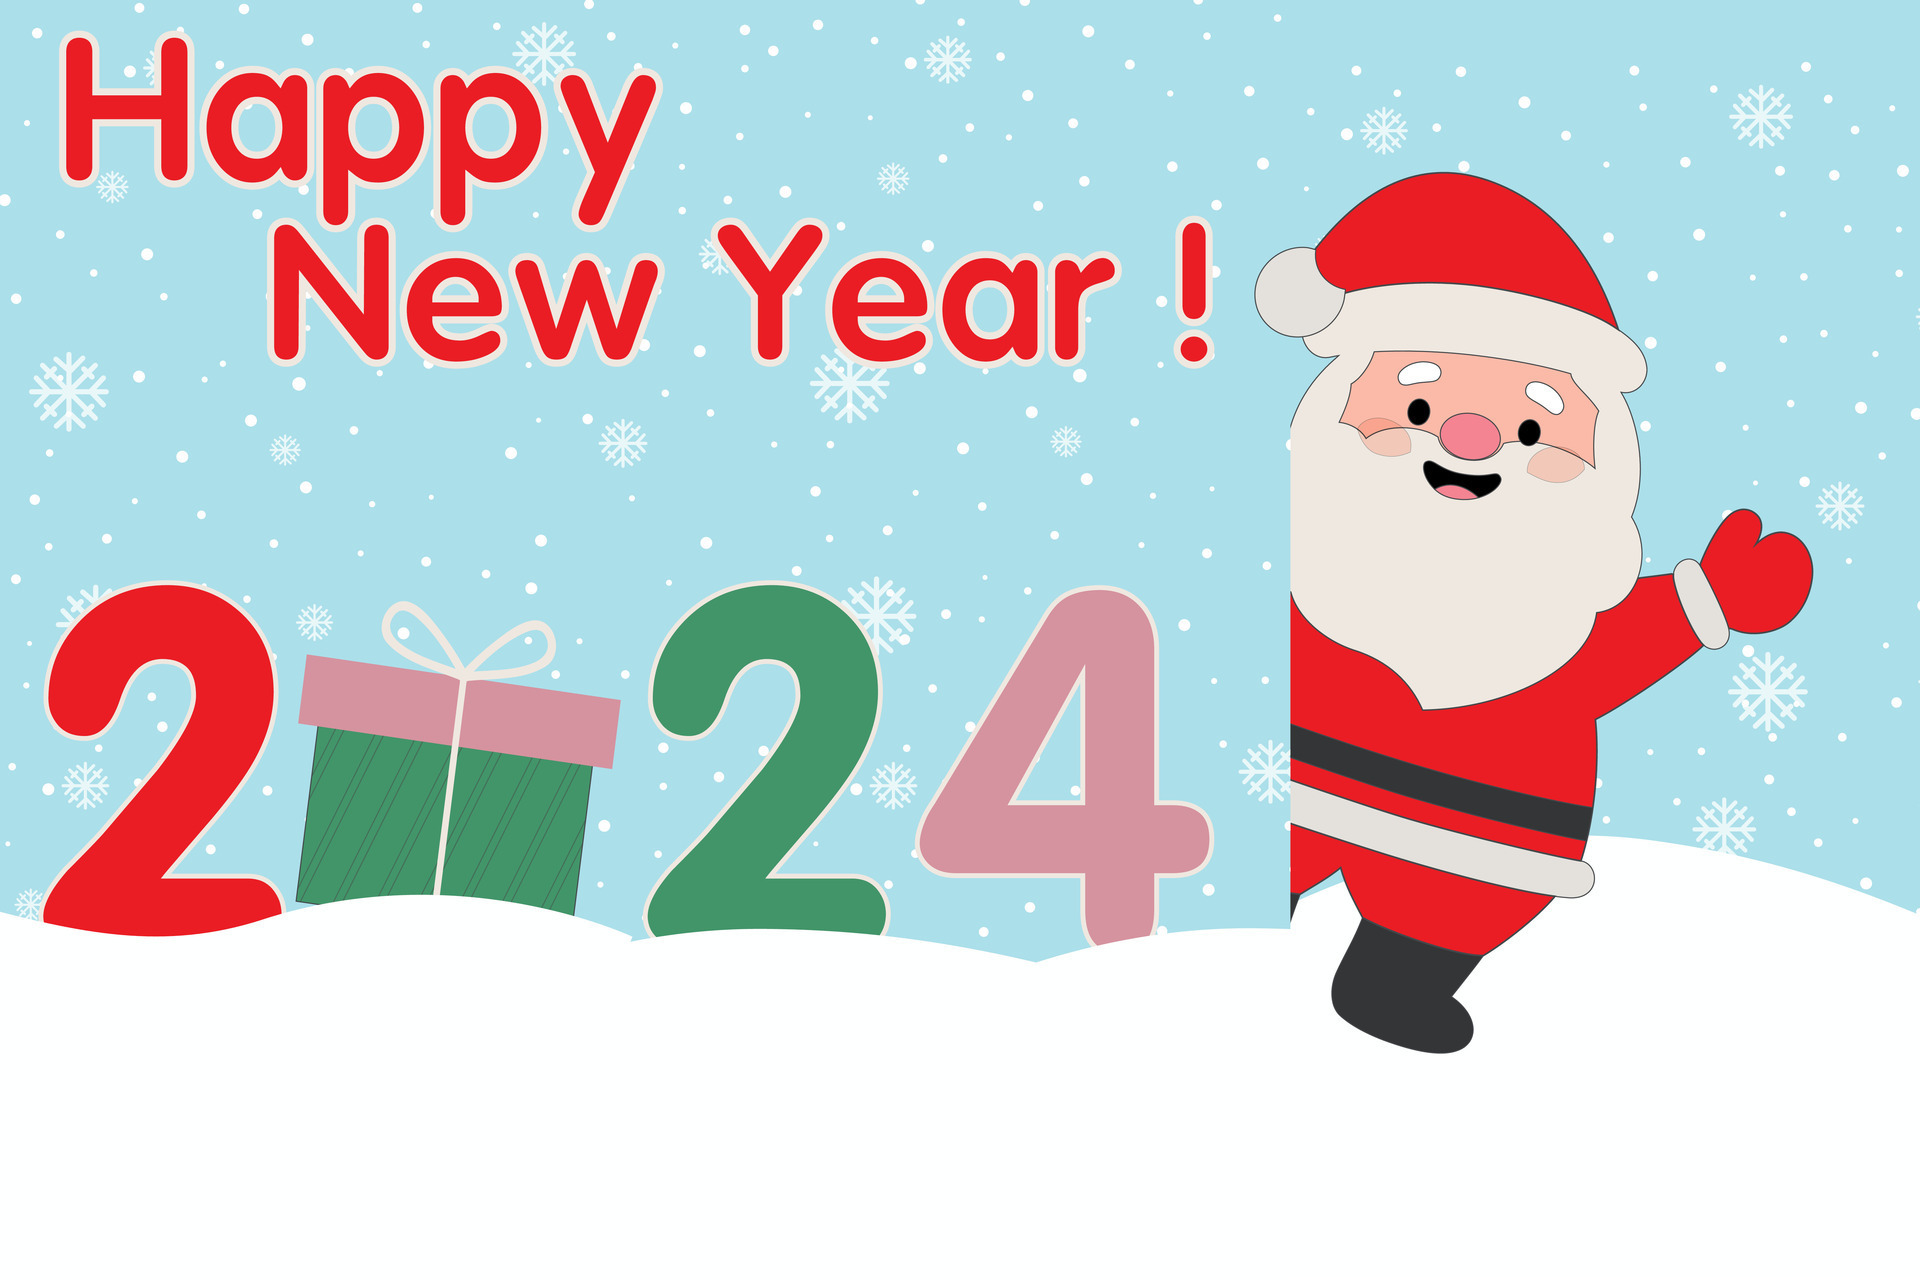 Merry christmas and Happy new year 2024 with santa claus cute cartoon